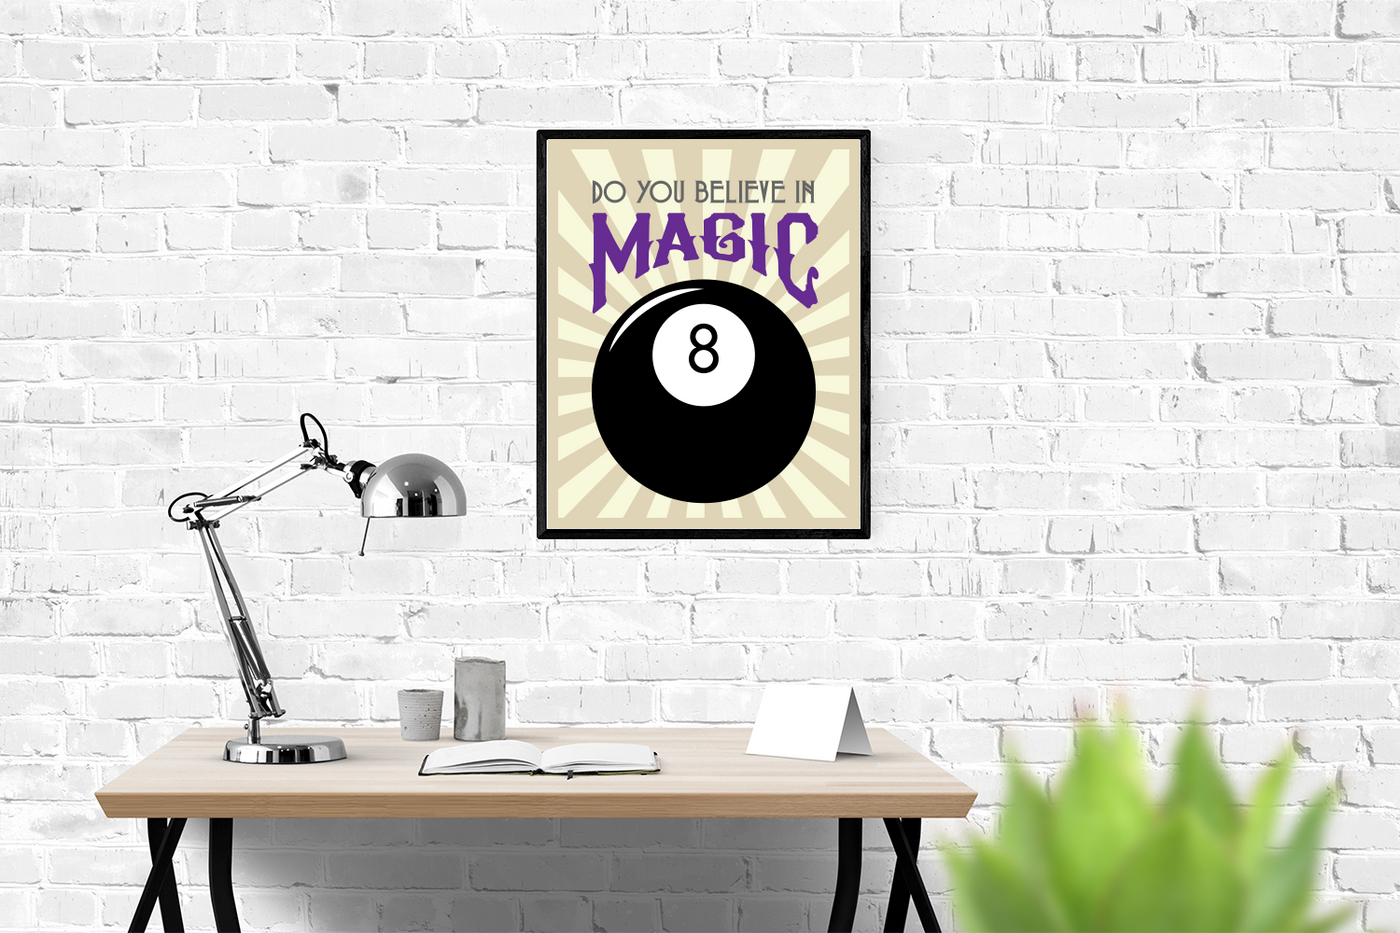 Framed poster above a desk. The poster has a large 8 ball and says "Do you believe in Magic"